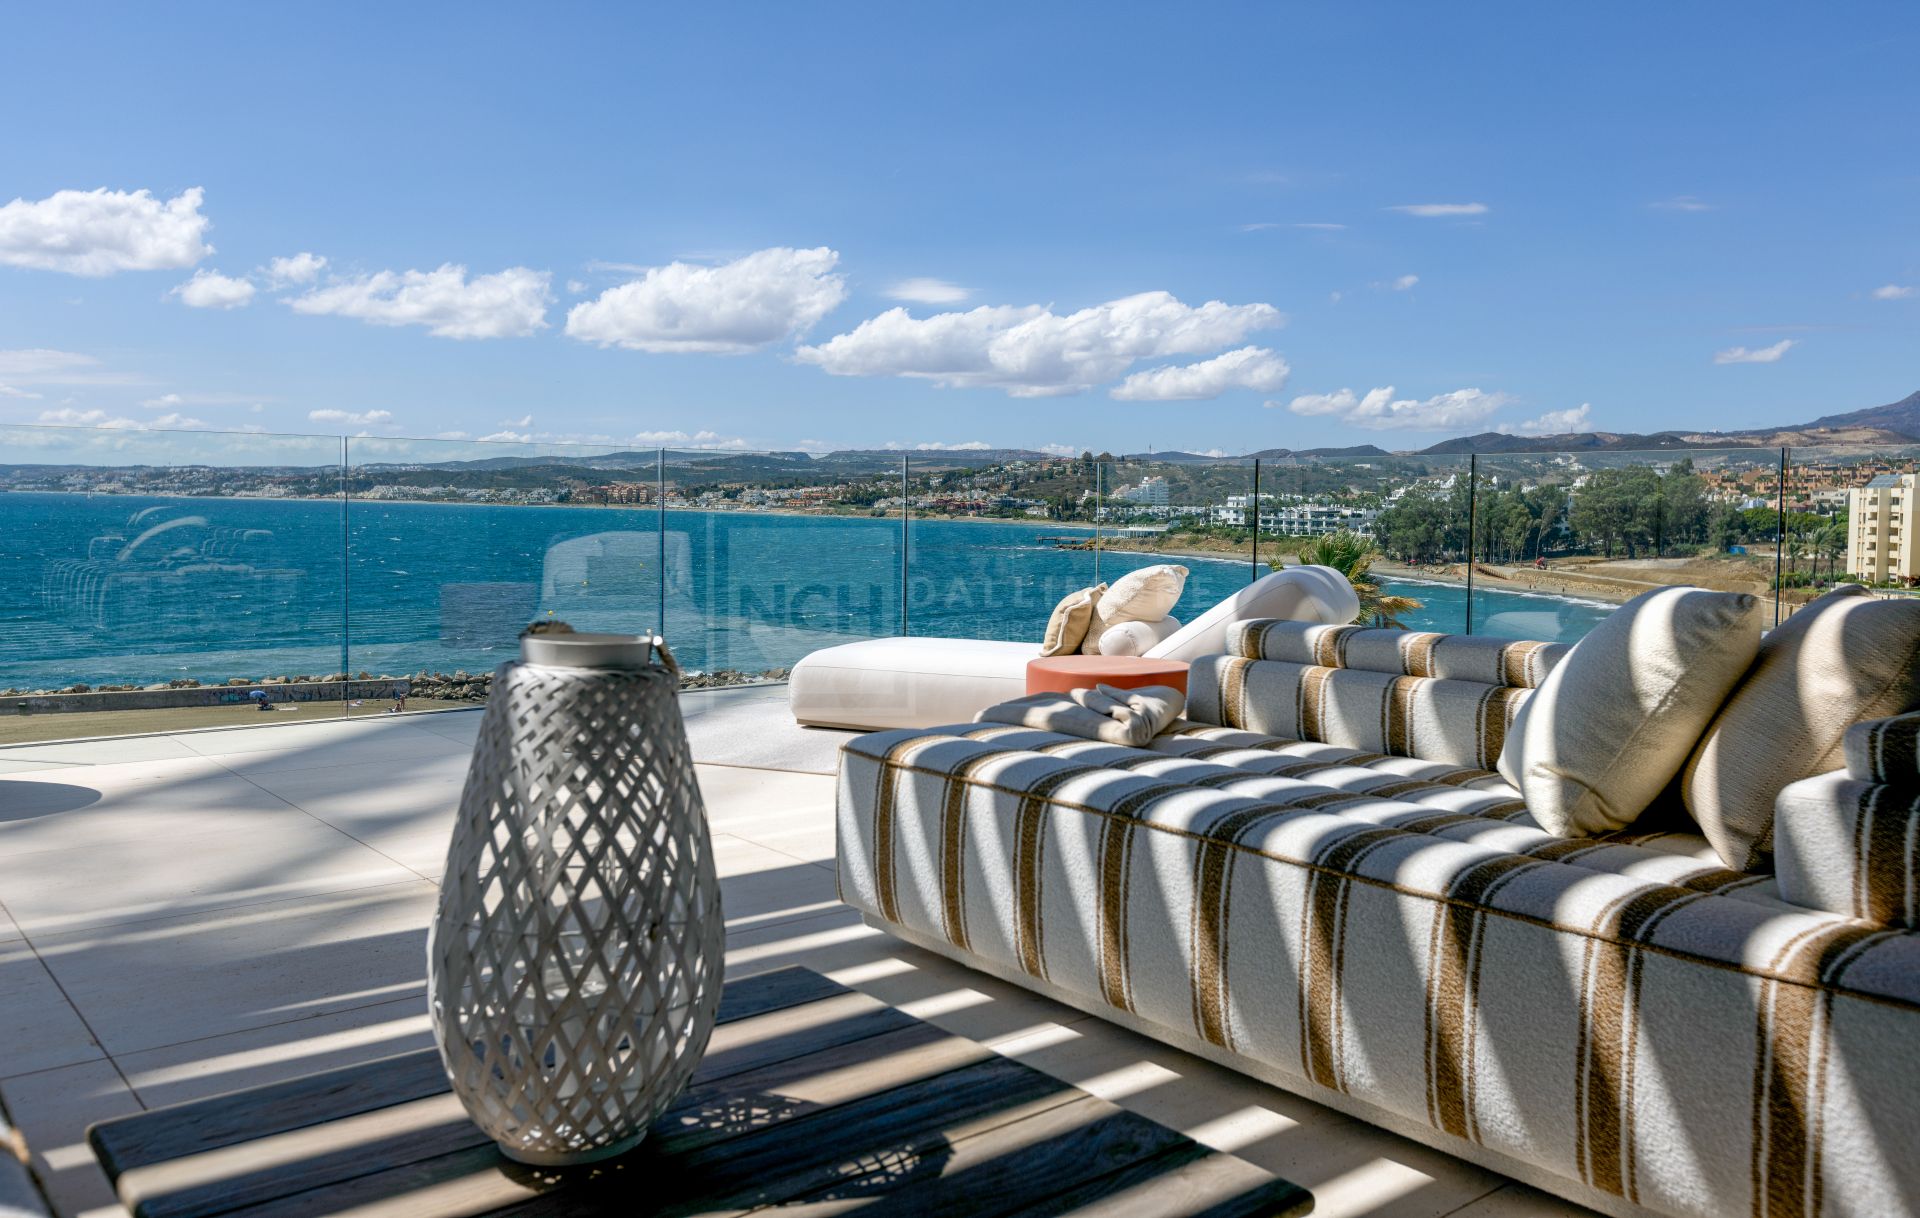 ULTRA LUXURY 3BEDROOM PENTHOUSE APARTMENT FRONTLINE BEACH CLOSE TO ESTEPONA TOWN